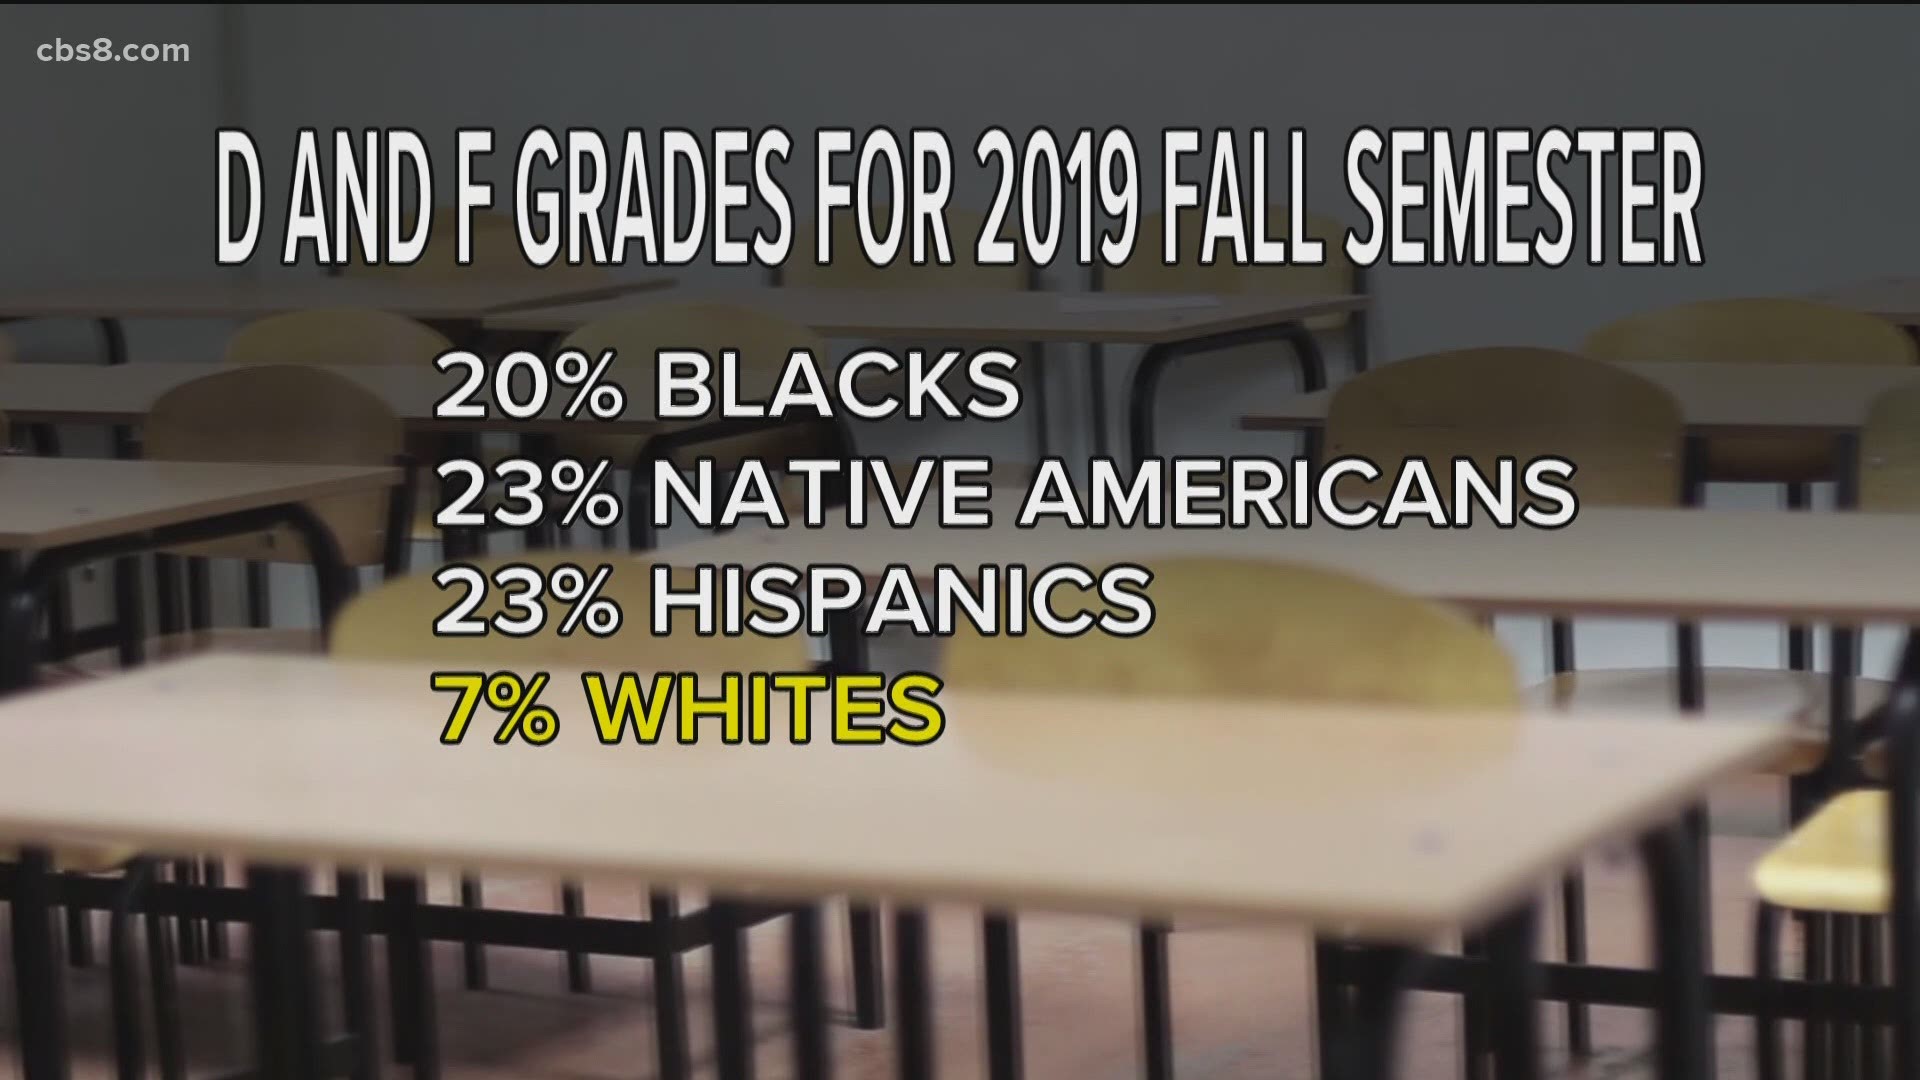 White students made up only seven percent of students earning D or F grades.